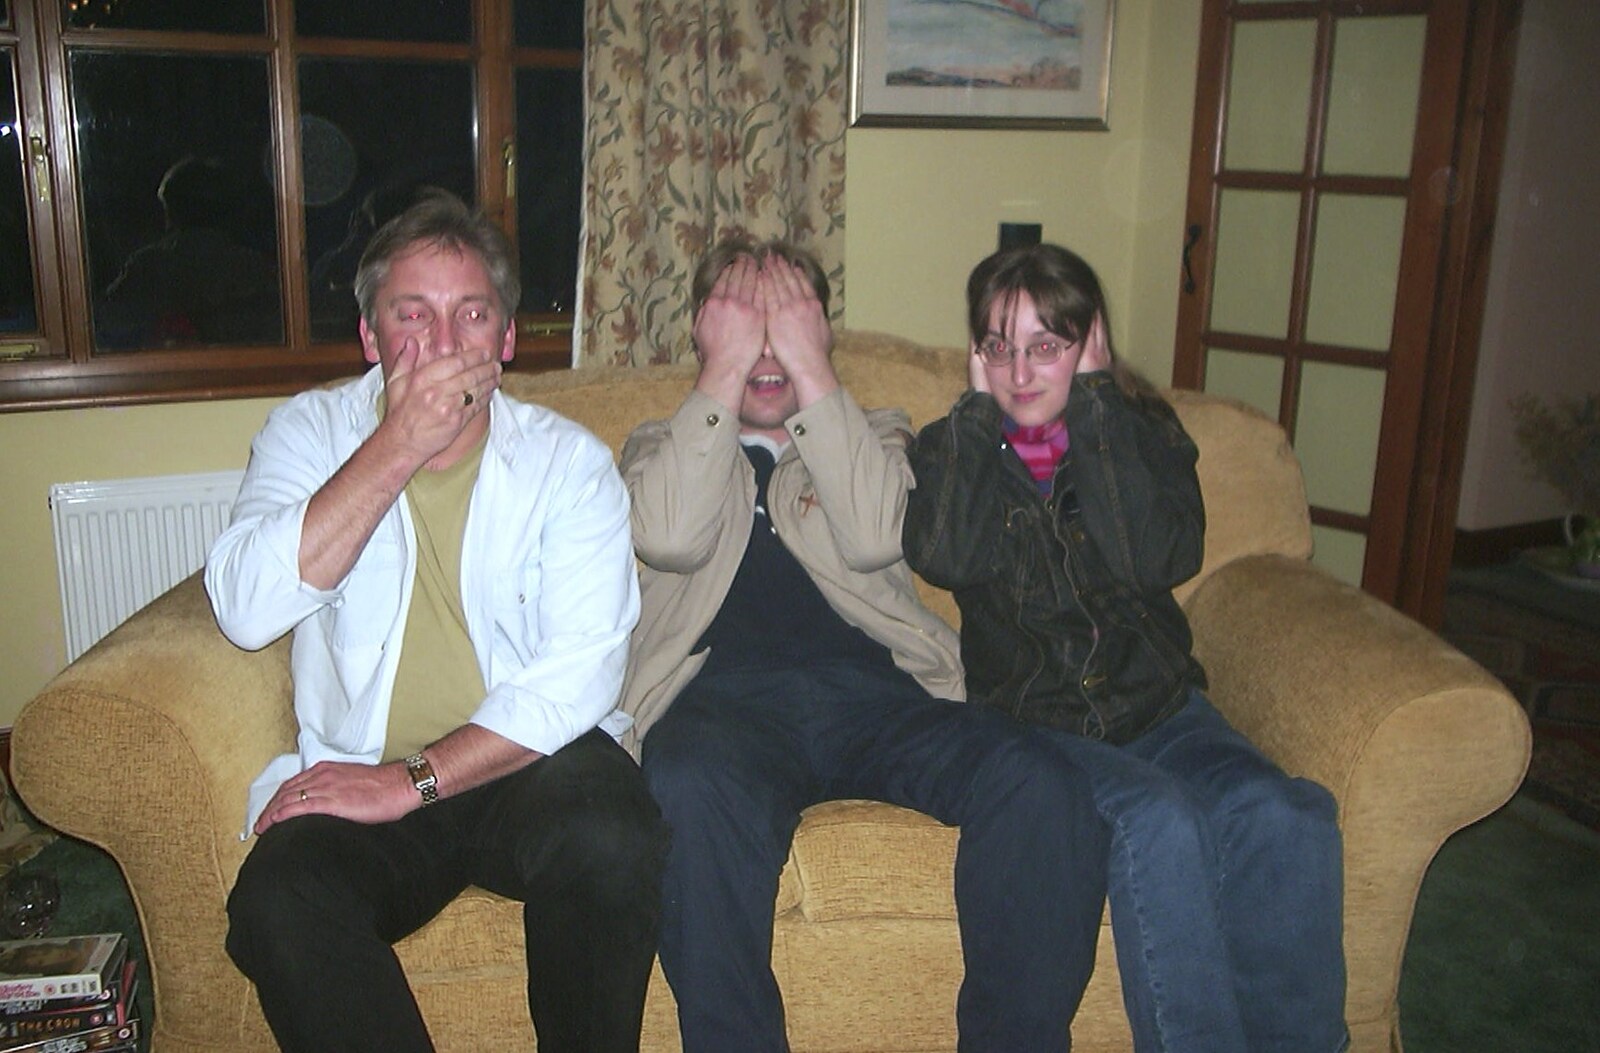 The three wise monkeys from Suey's Actual Birthday, Thorndon, Suffolk - 2nd April 2002